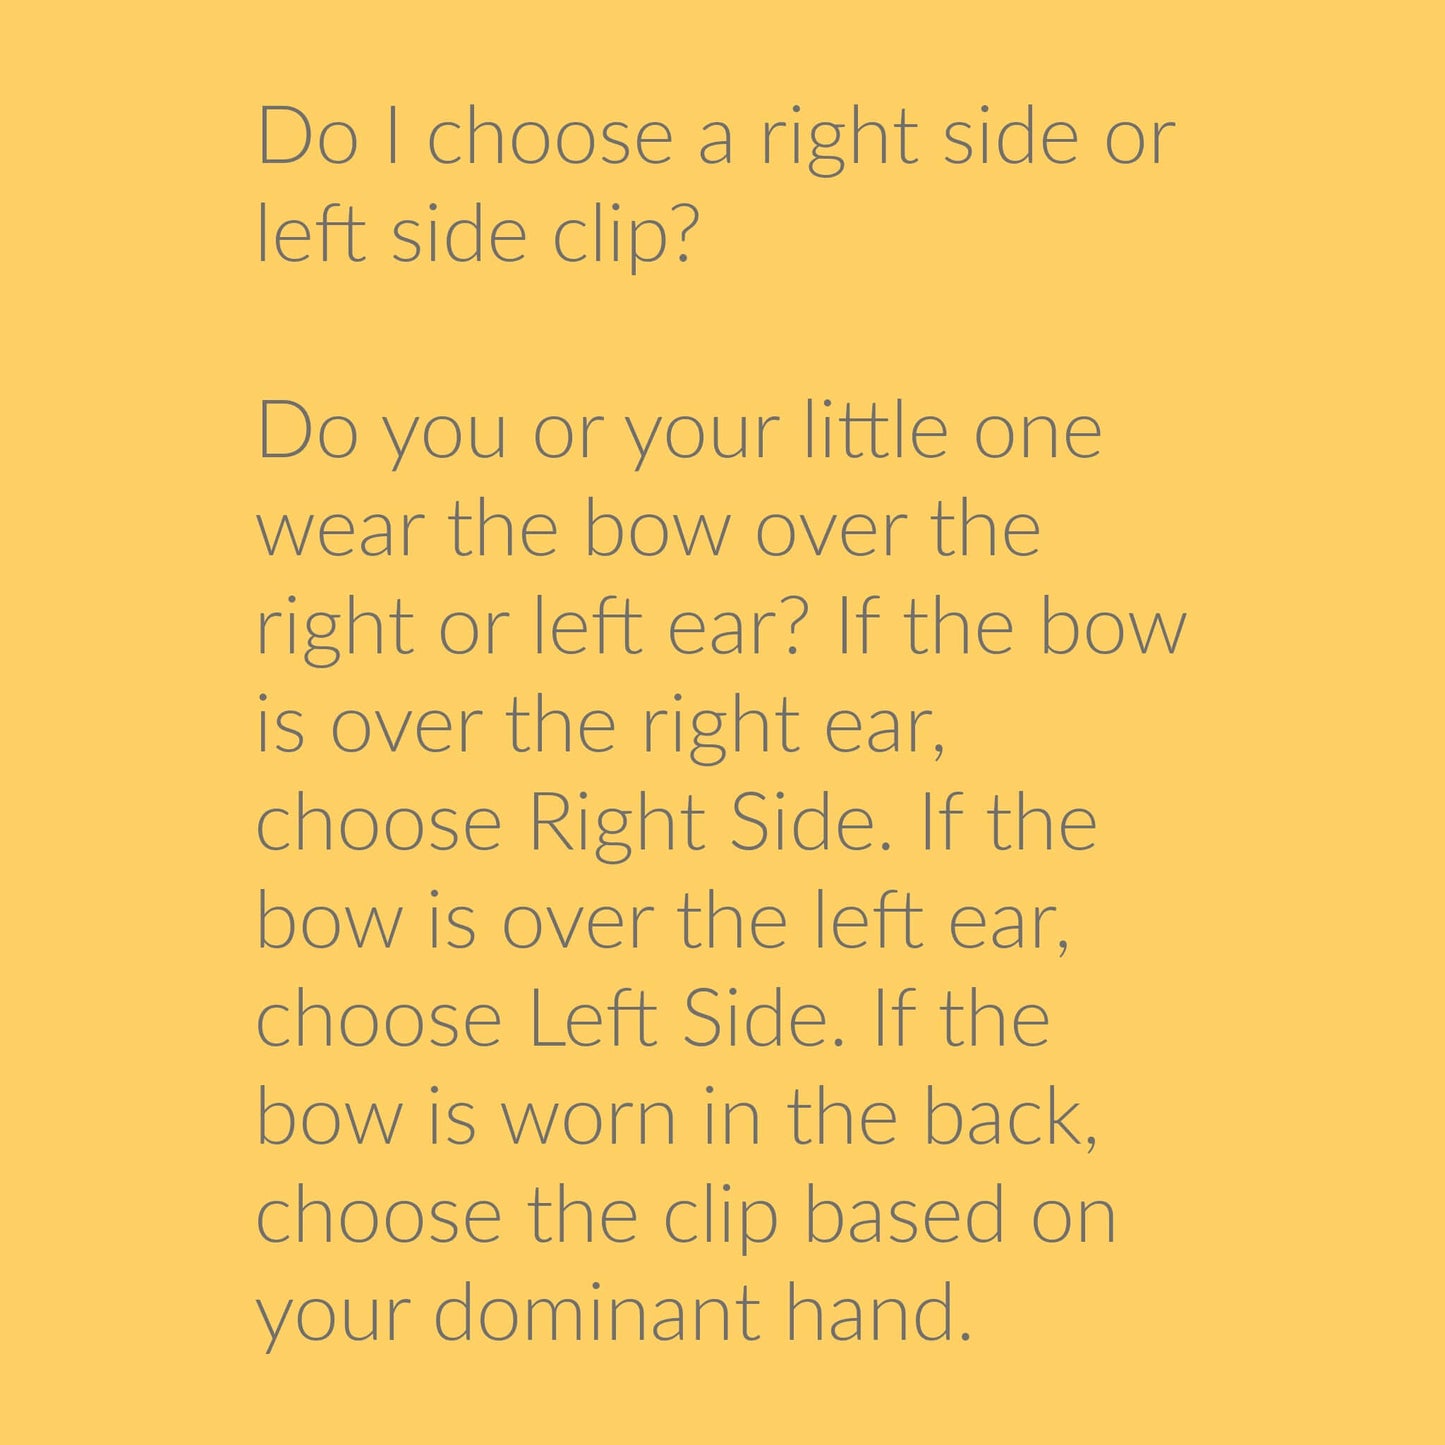 Choose the right or left side clip based on where the bow is worn, with guidance for right, left, and back placement.